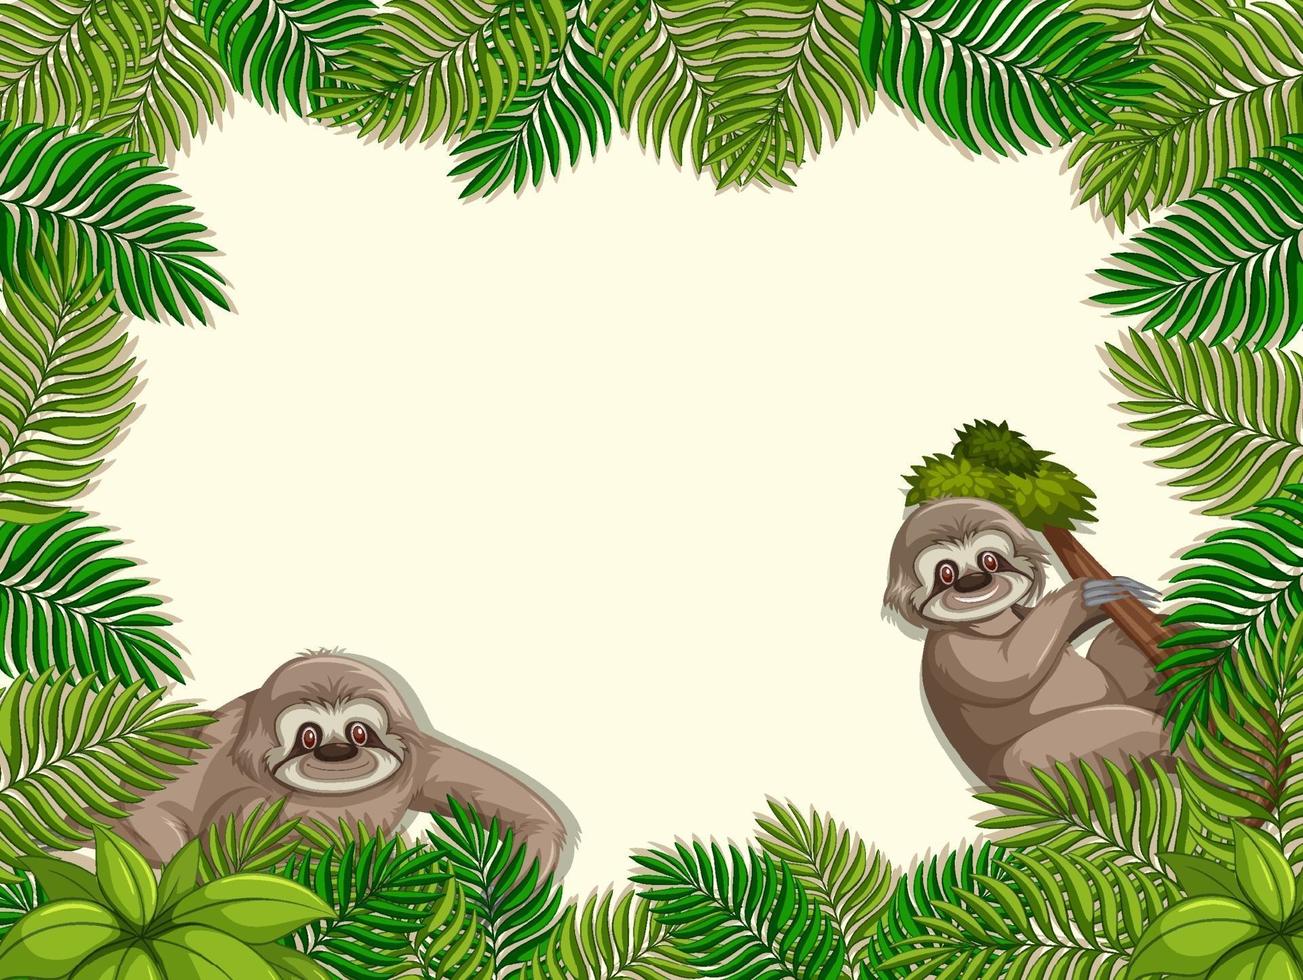 Empty banner with tropical leaves frame and sloth cartoon character vector